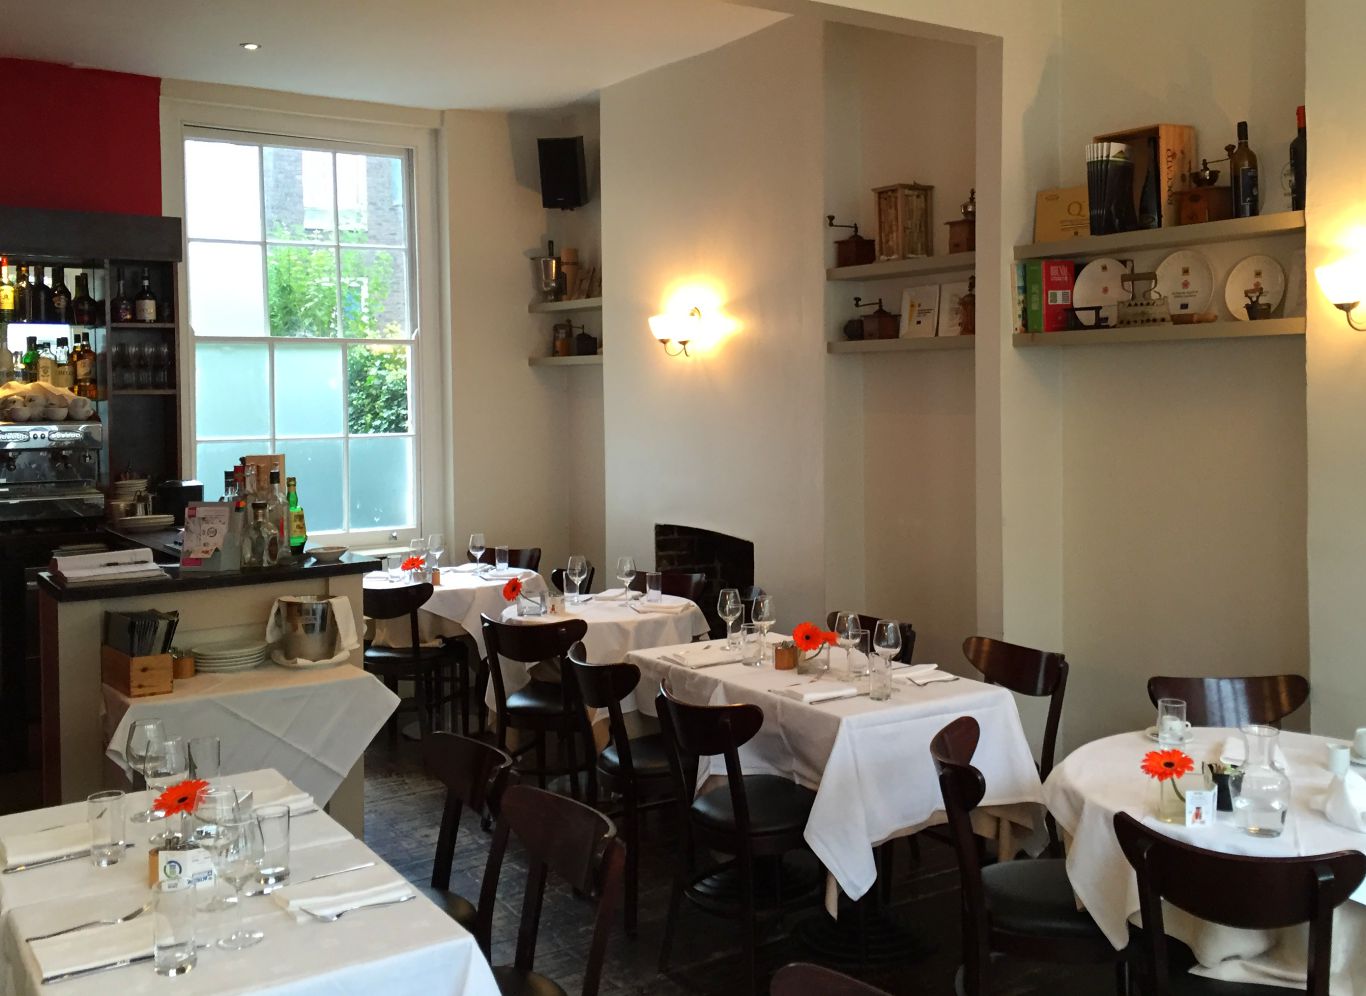 The simple main dining room. Photo: SE